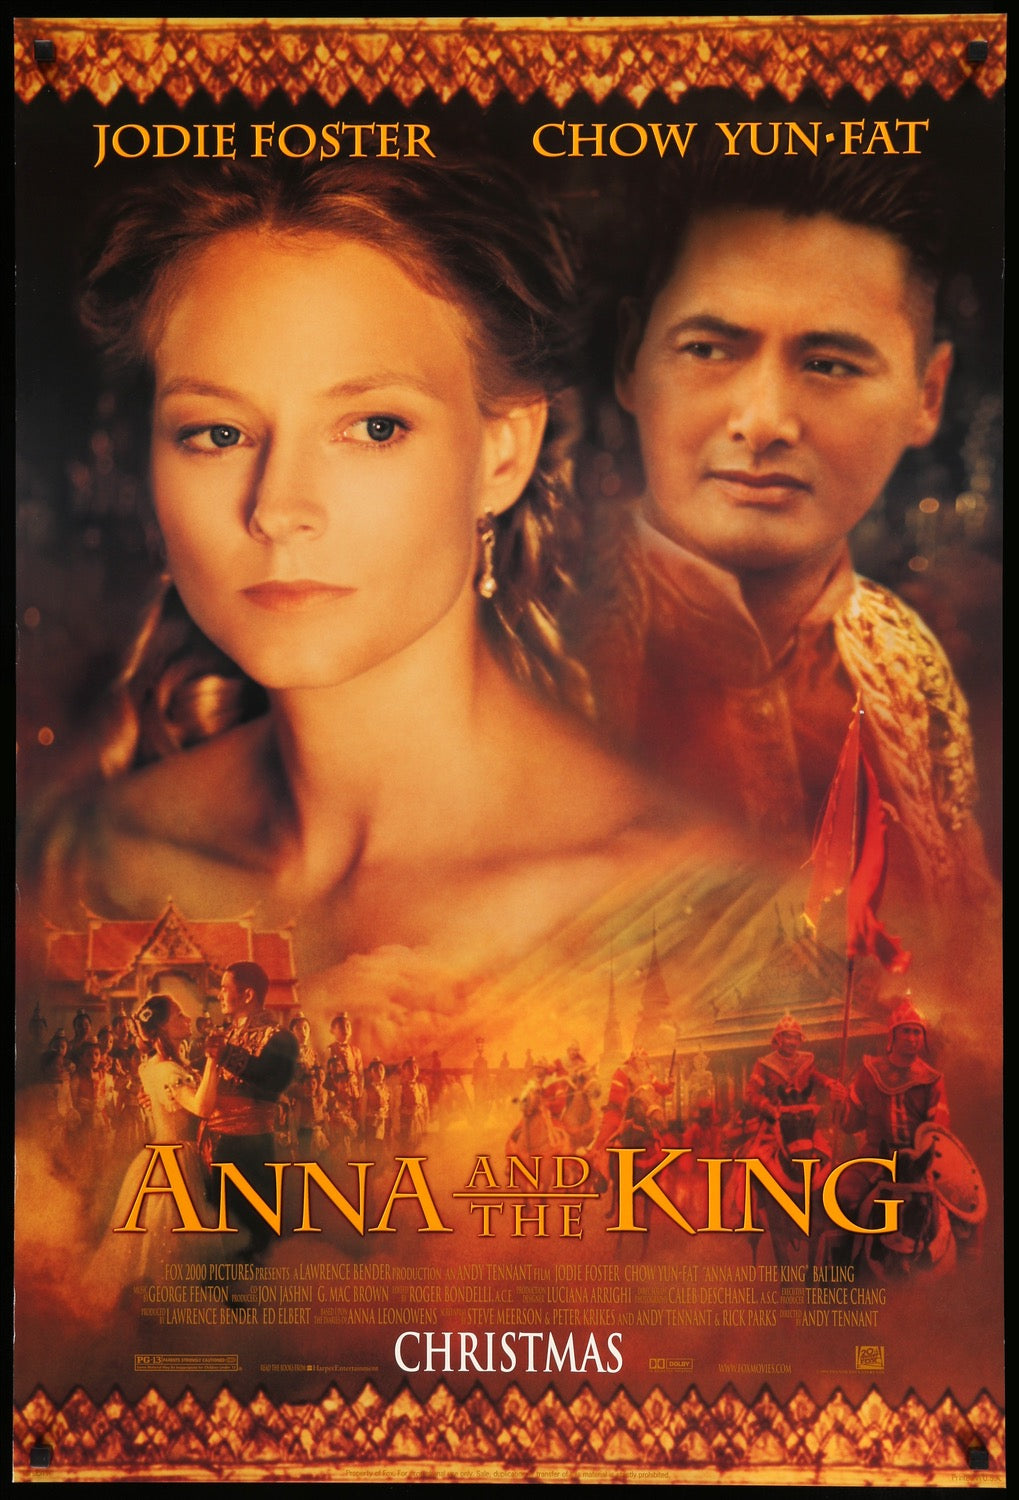 Anna and the King (1999) original movie poster for sale at Original Film Art